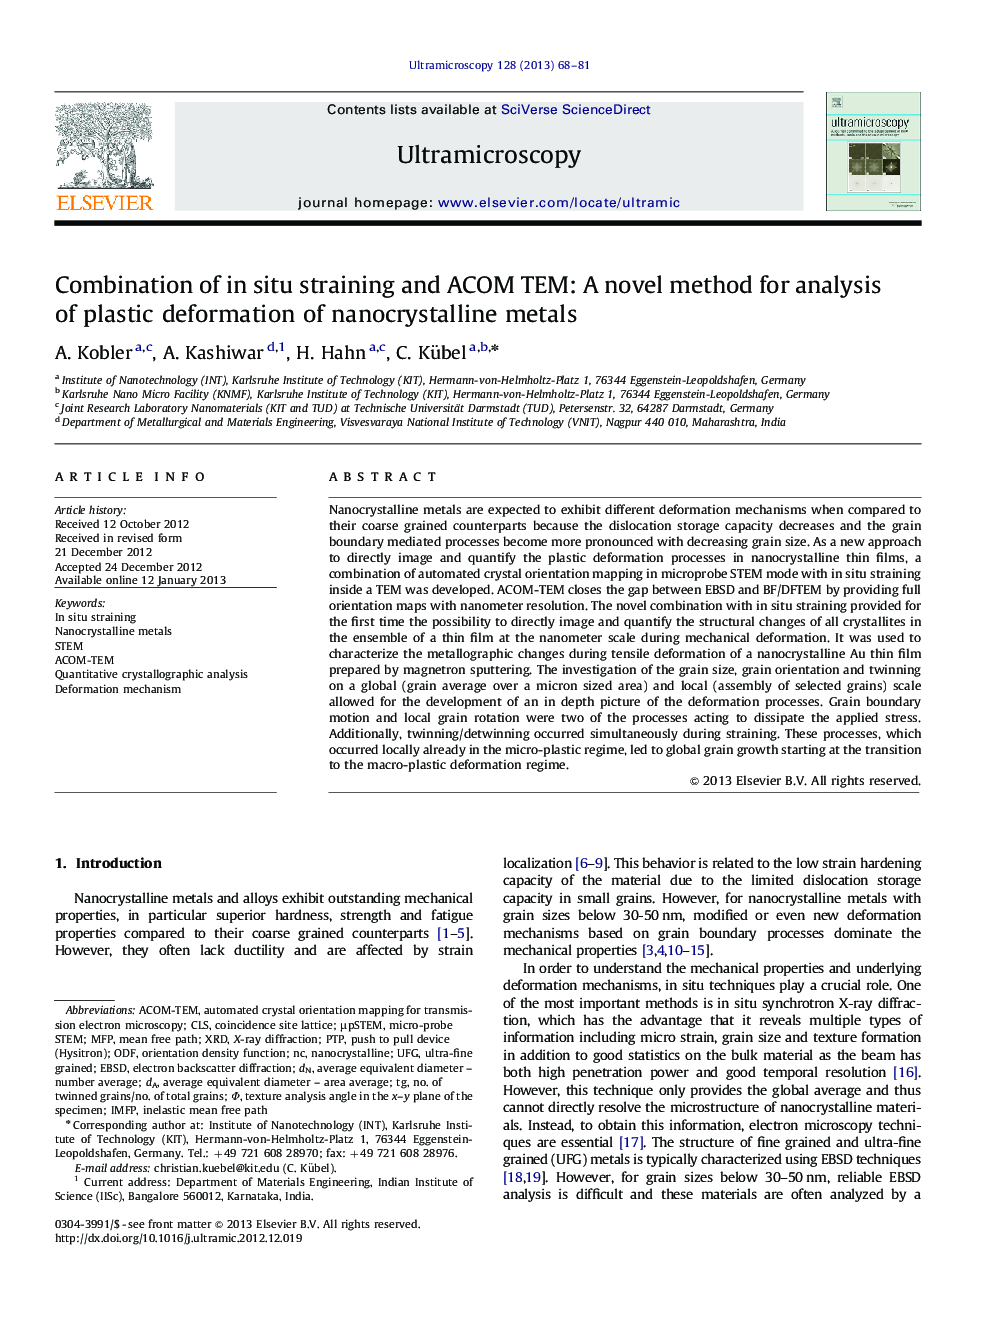 Combination of in situ straining and ACOM TEM: A novel method for analysis of plastic deformation of nanocrystalline metals